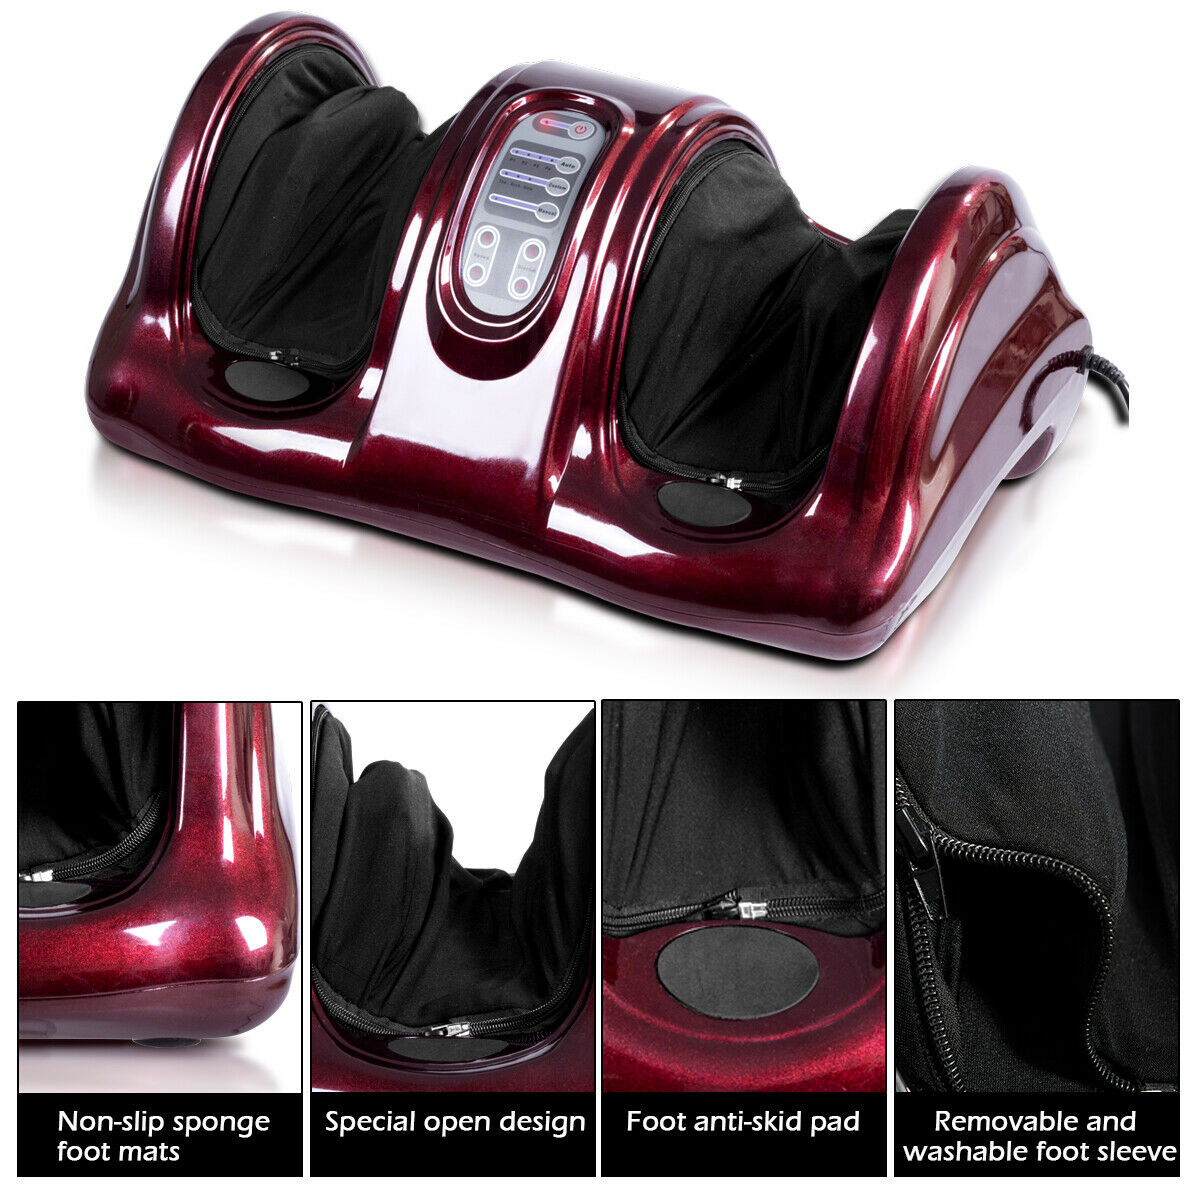 Costway Shiatsu Foot Massager Kneading and Rolling Leg Calf Ankle with Remote Burgundy